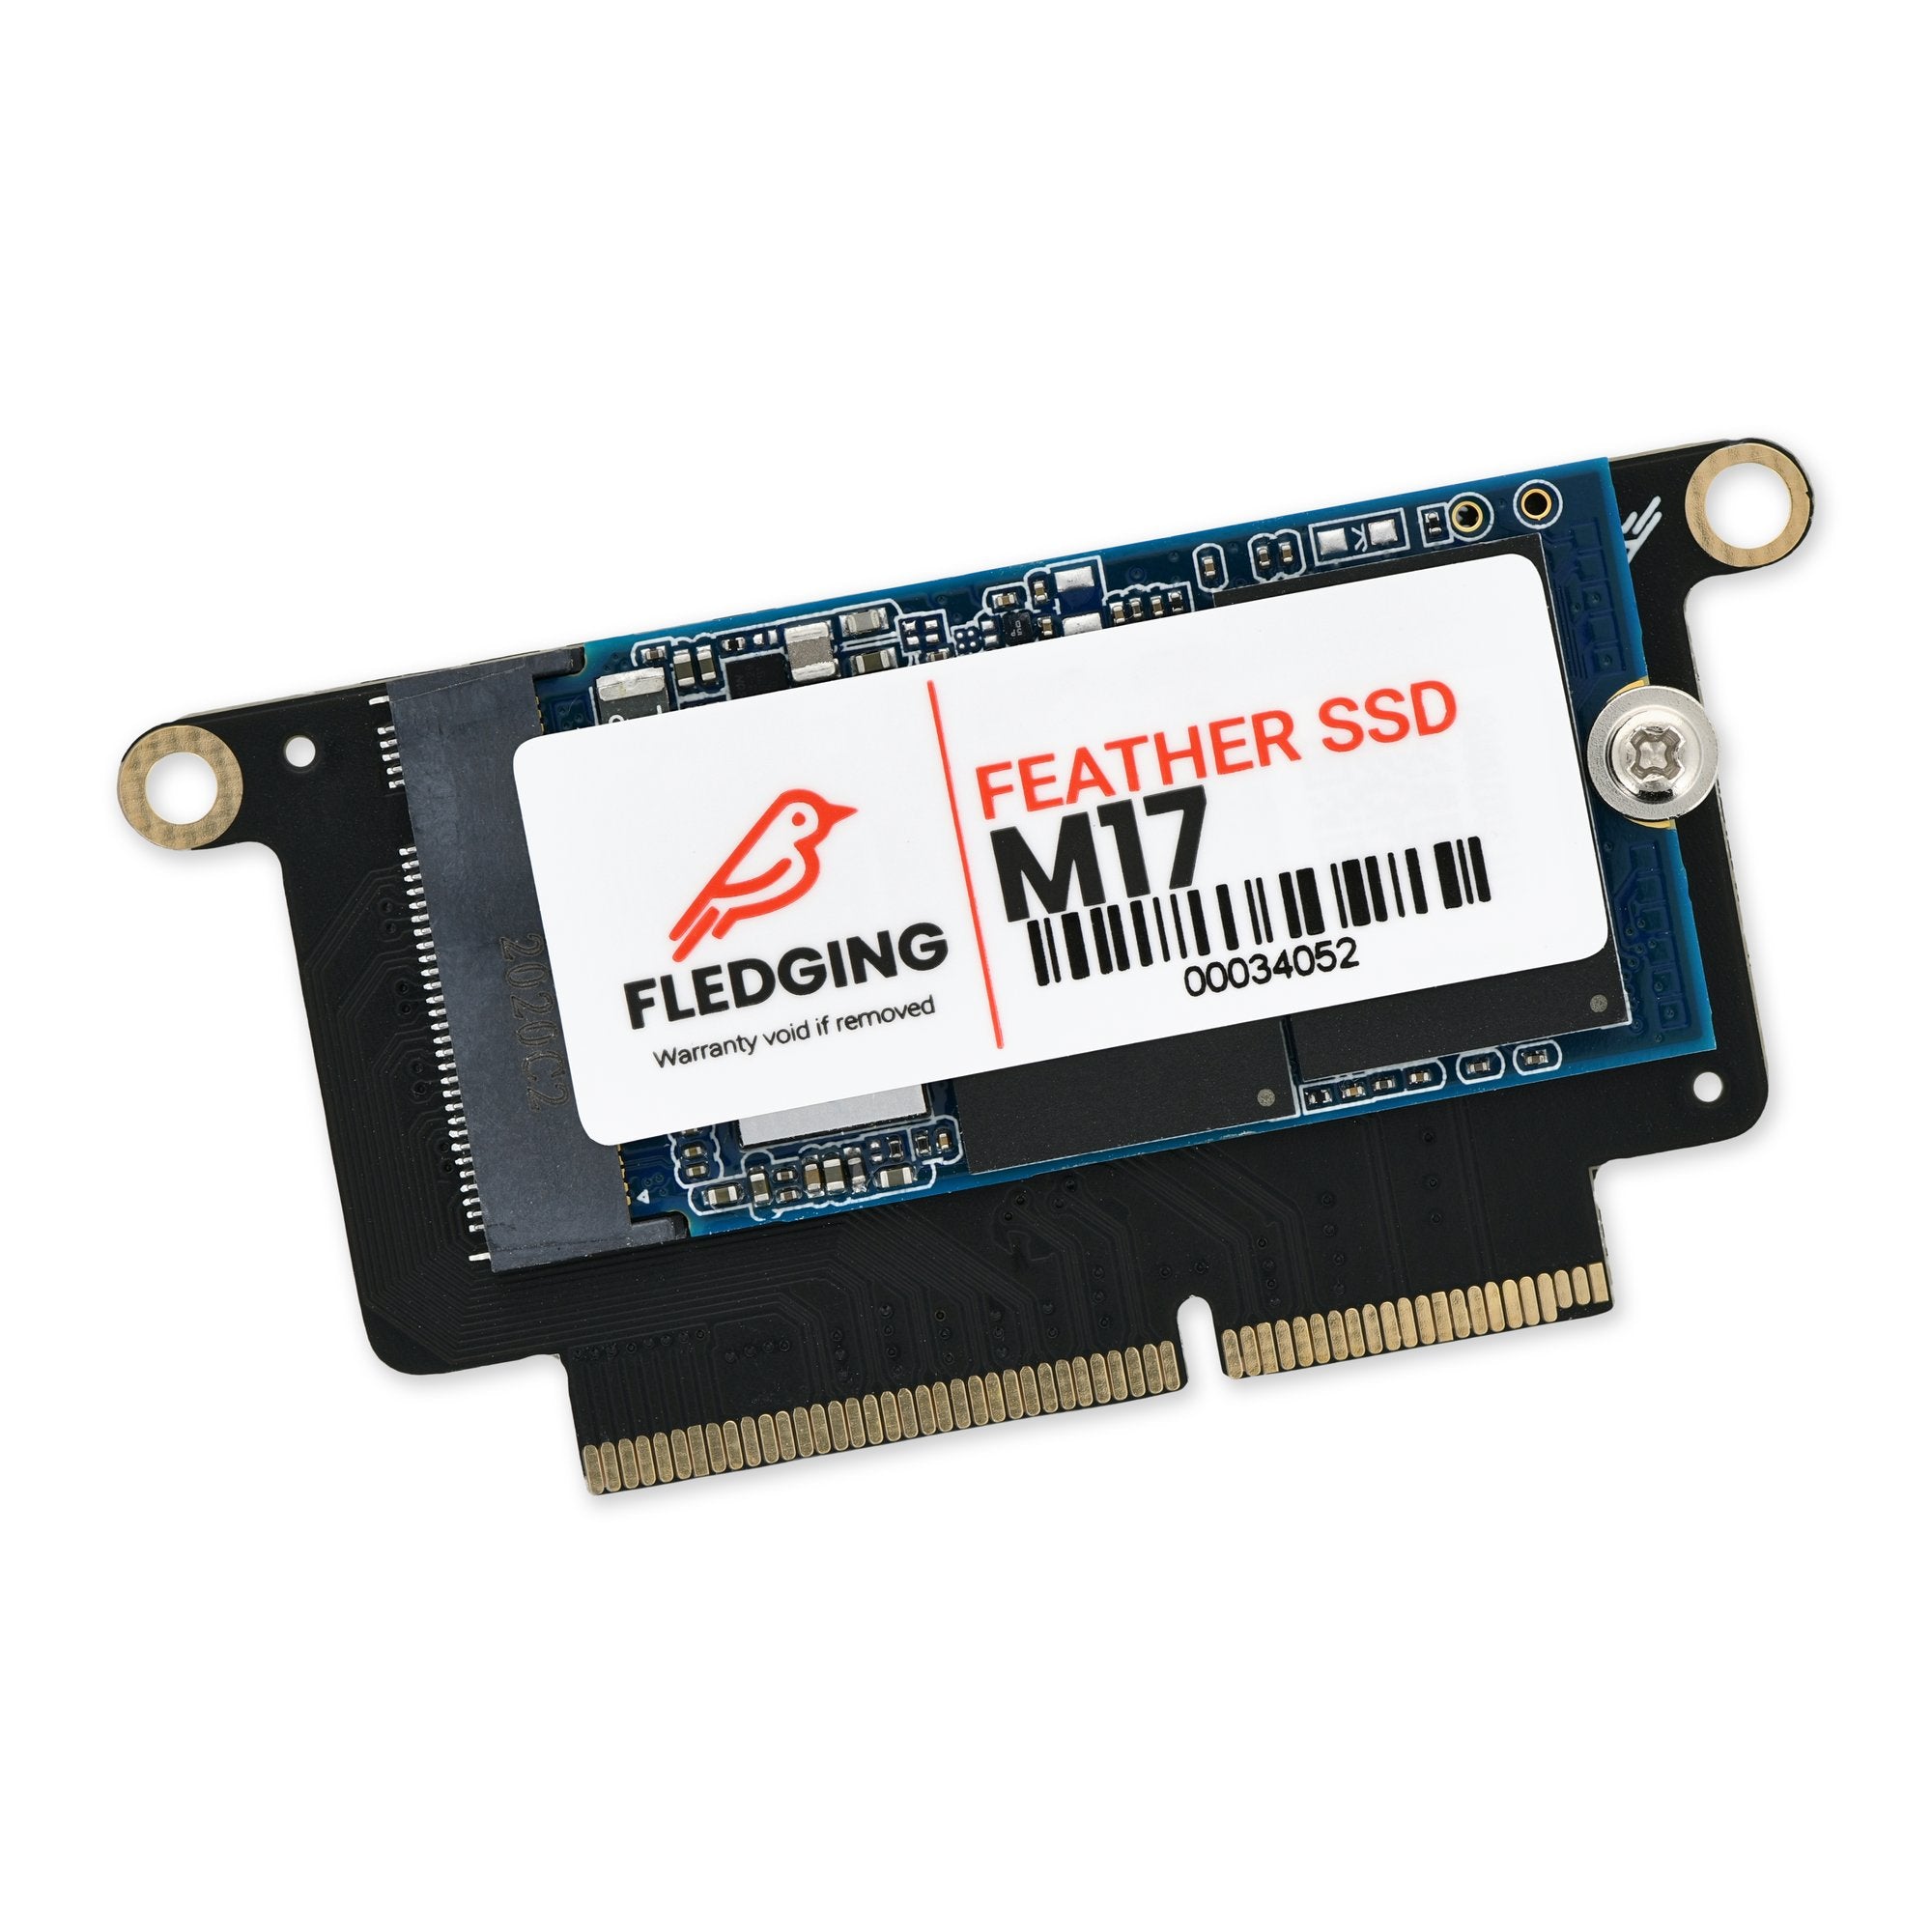 Fledging Feather M17 Upgrade MacBook 13" A1708